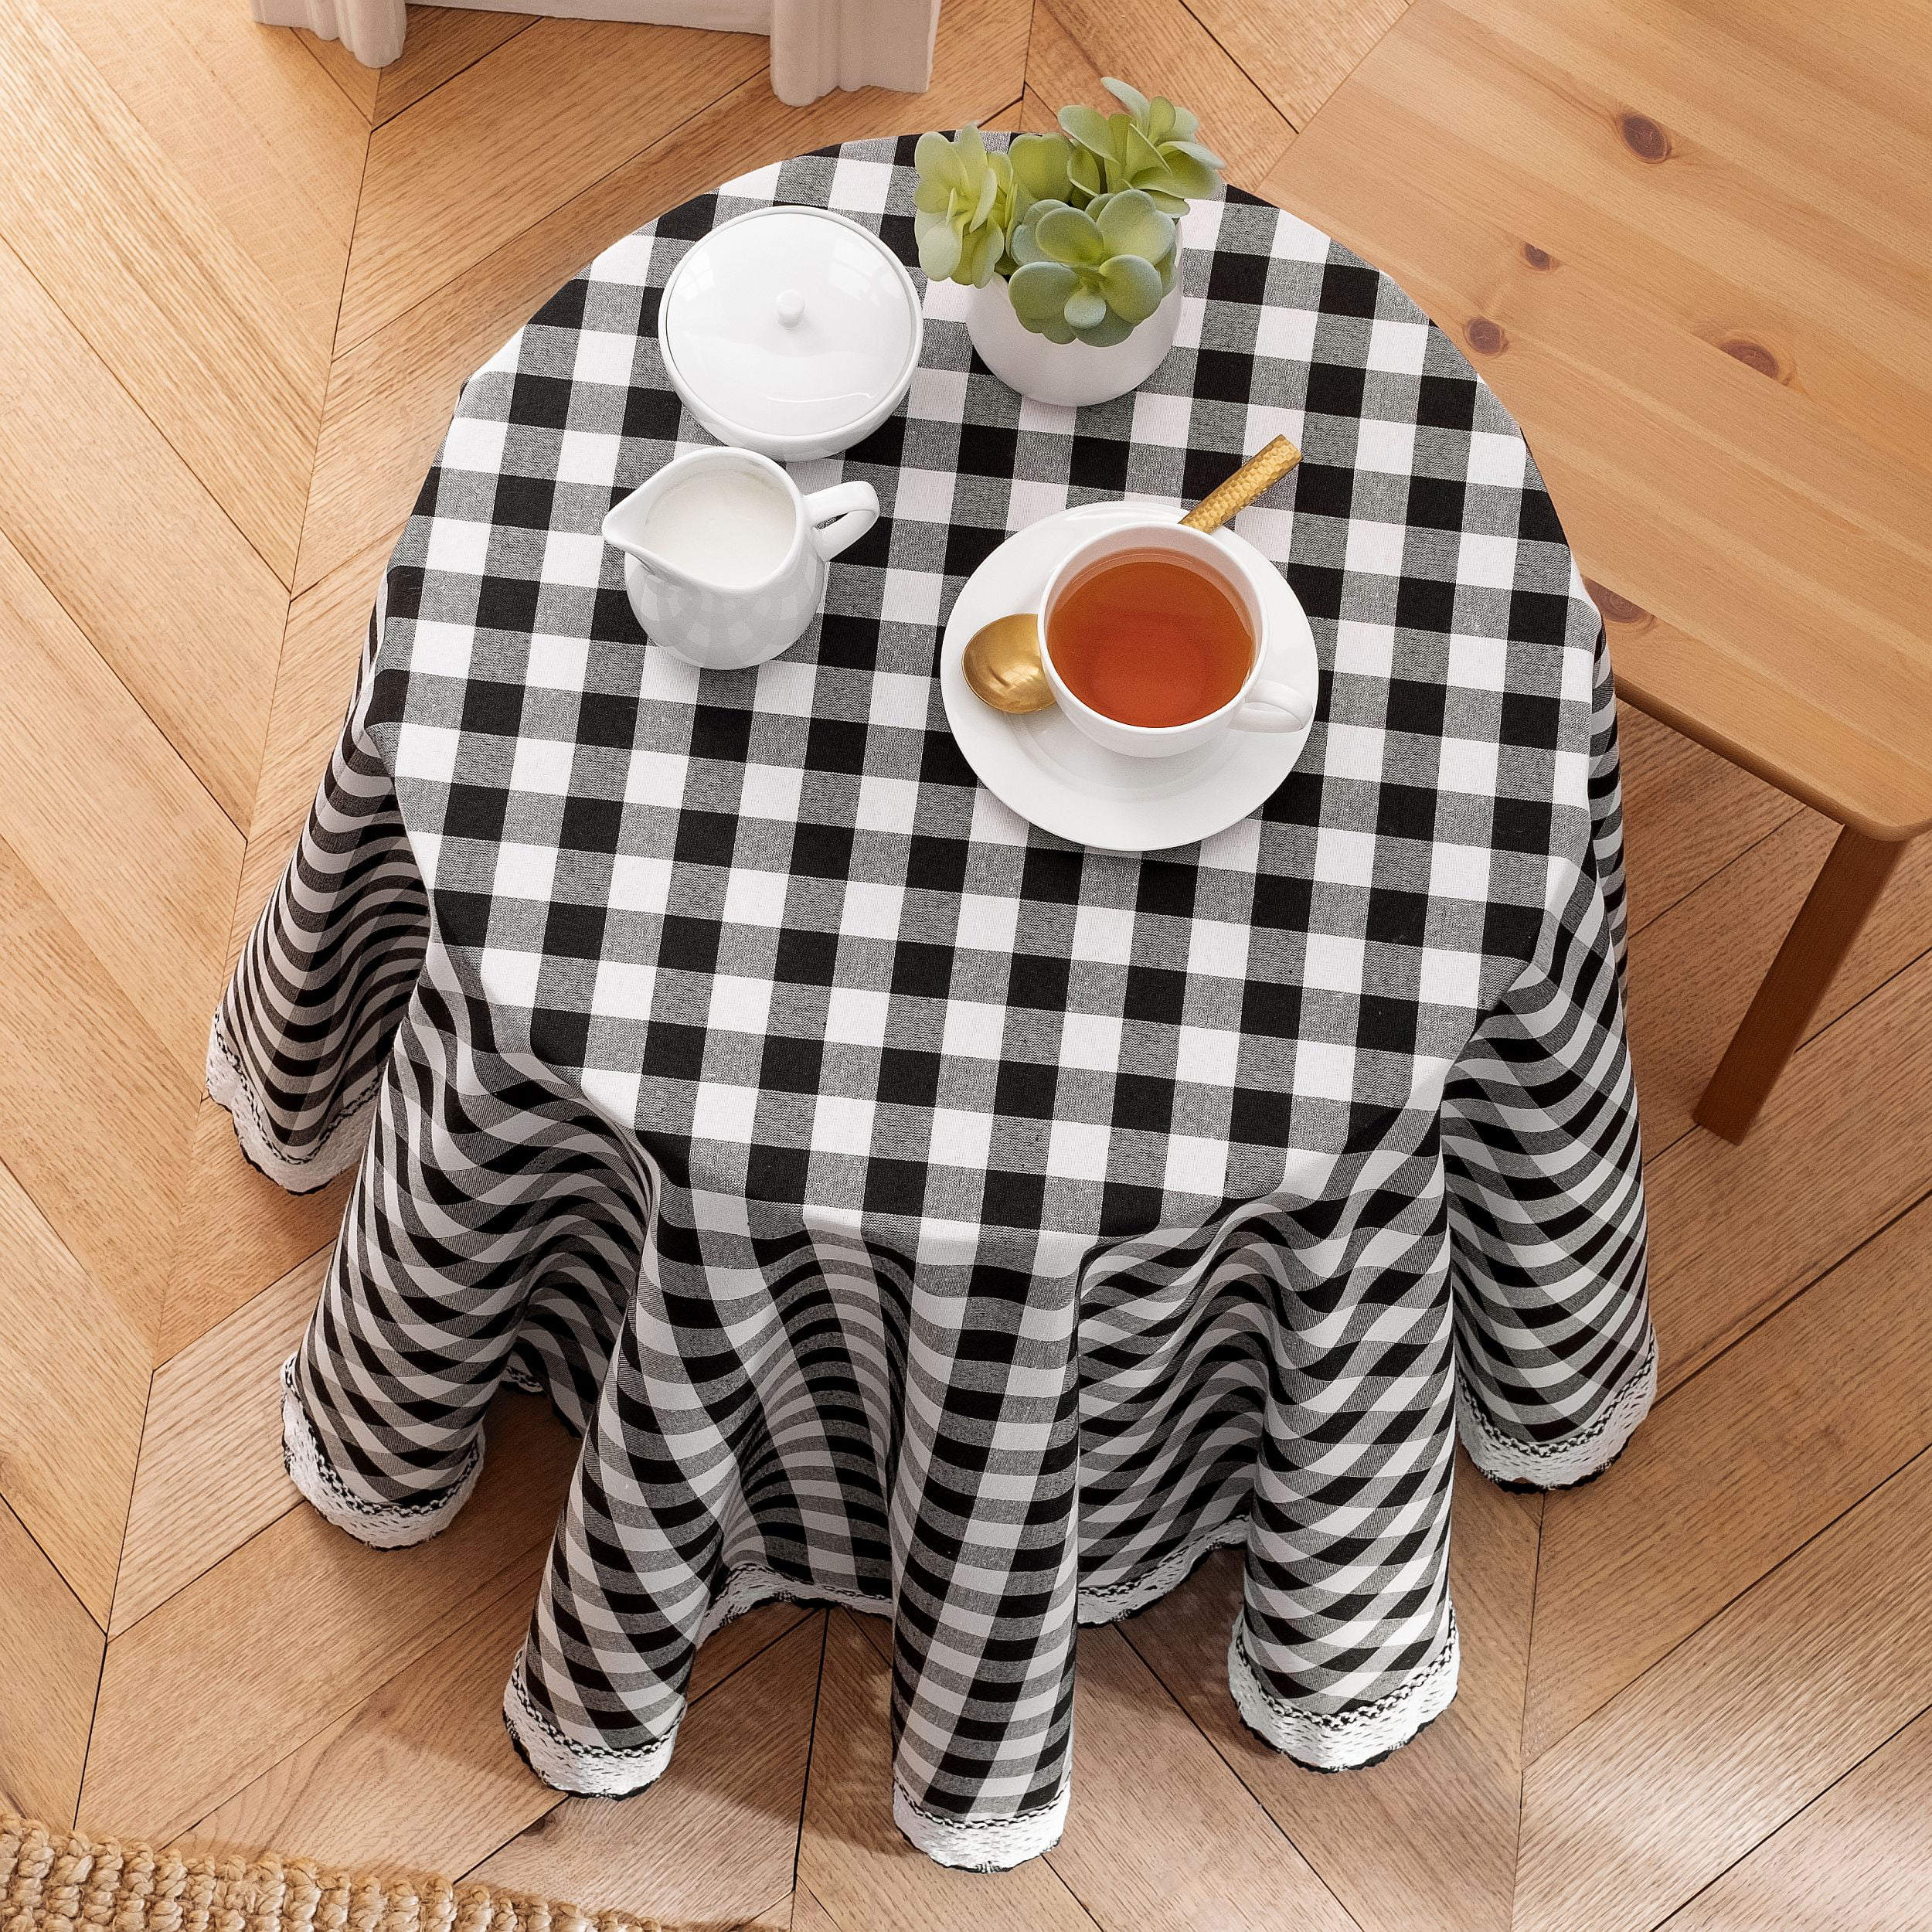 Leaveforme Plaid Pattern Kitchen Table Cover Waterproof Heat Resistant  Tablecloth Decor